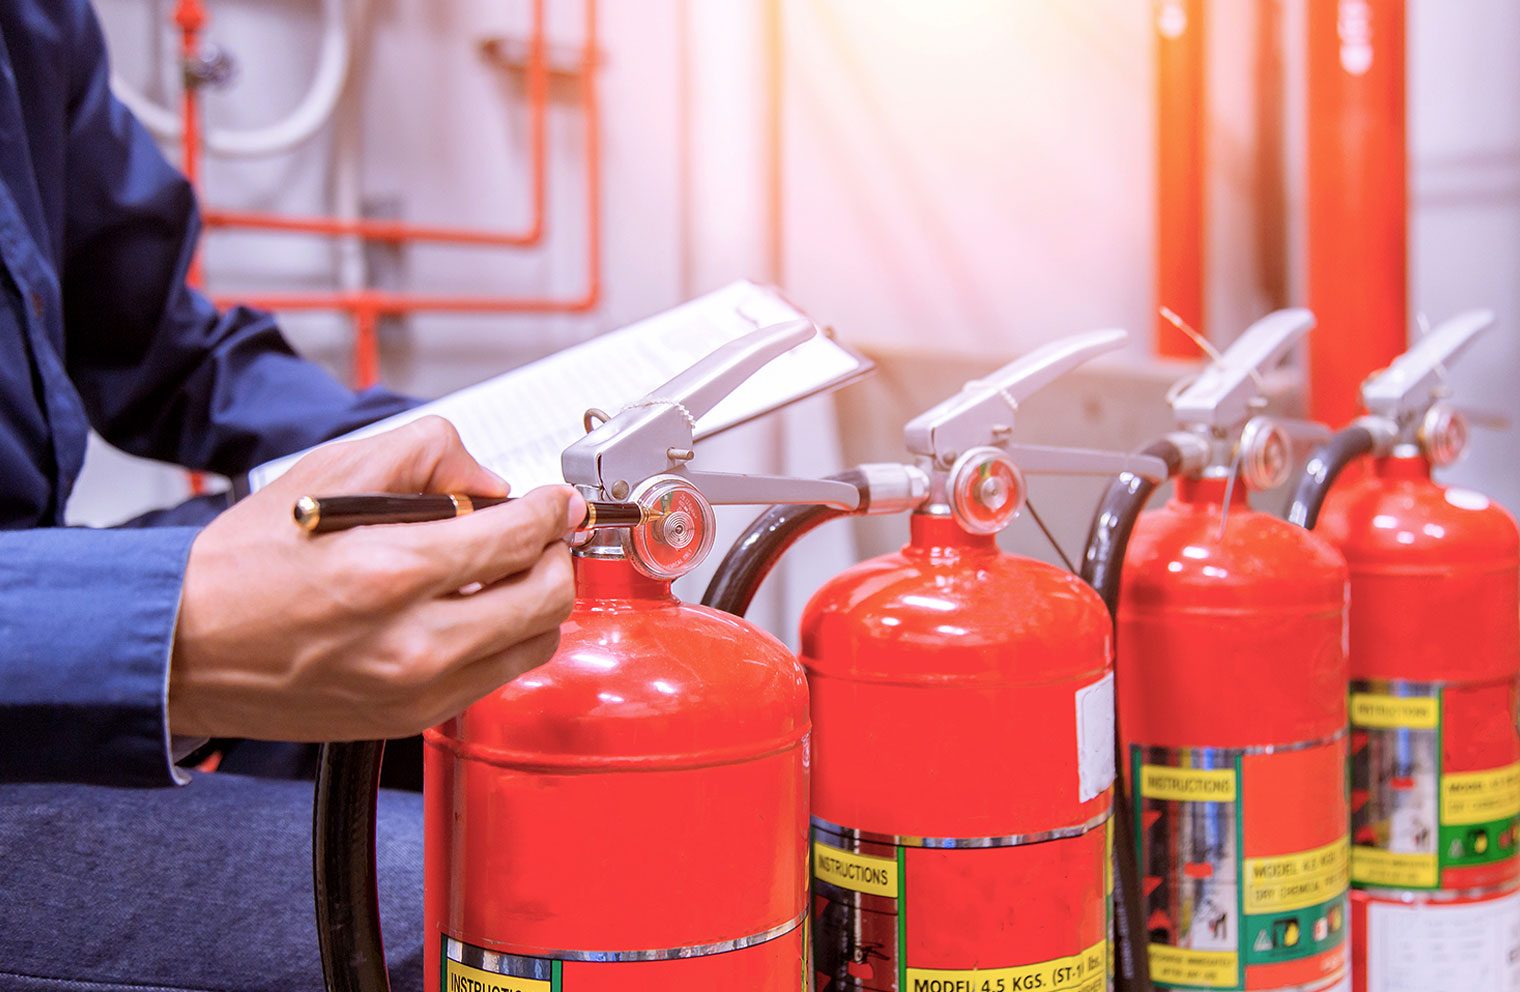 Image of person inspecting row of fire extinguishers with pen and paper in hand.